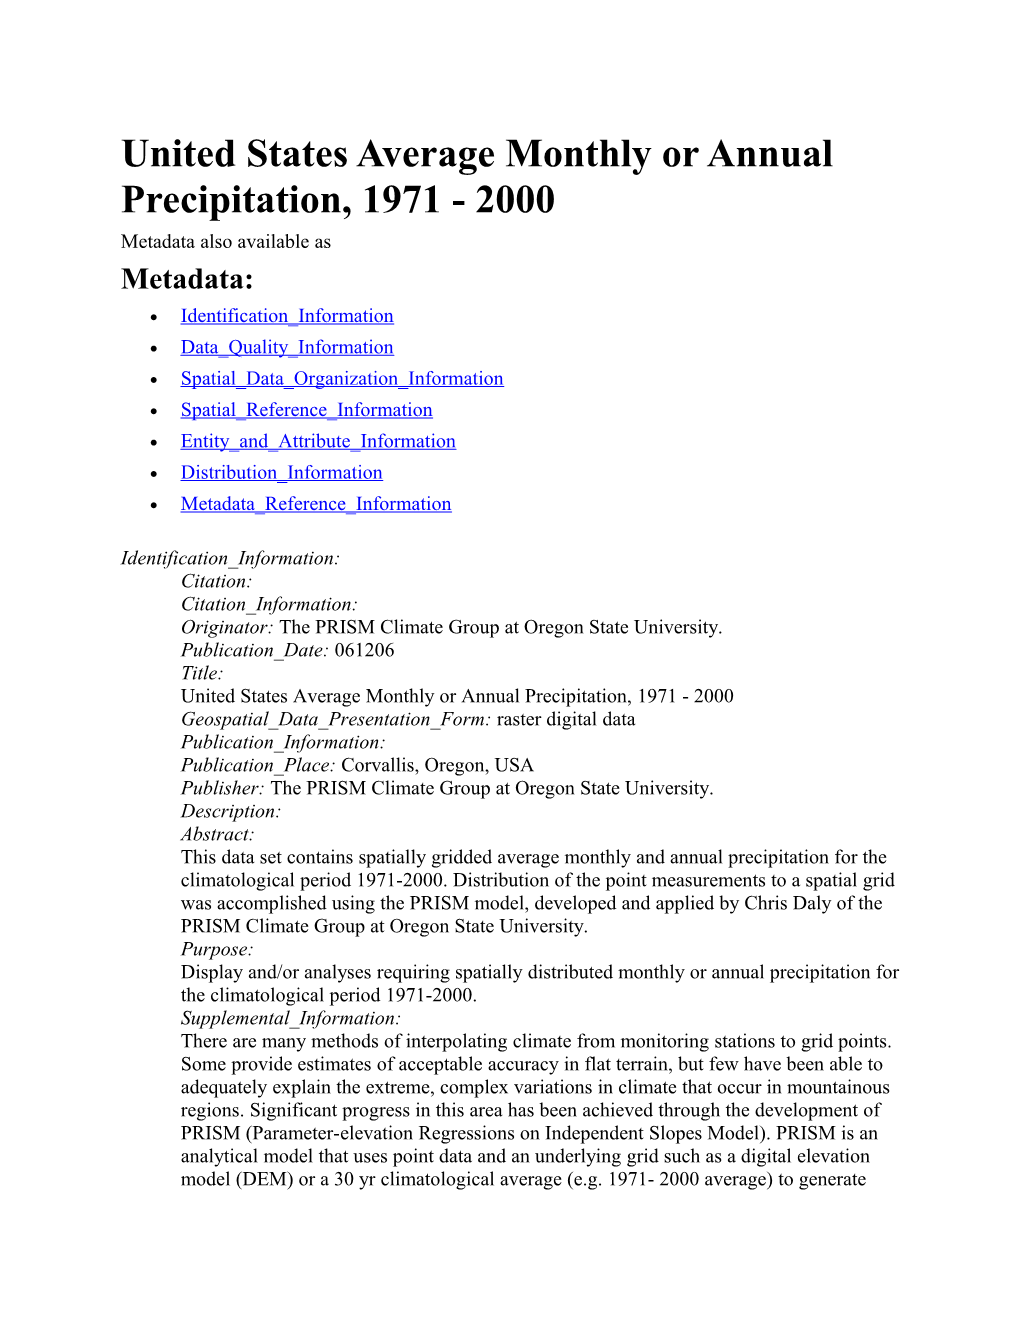 United States Average Monthly Or Annual Precipitation, 1971 - 2000